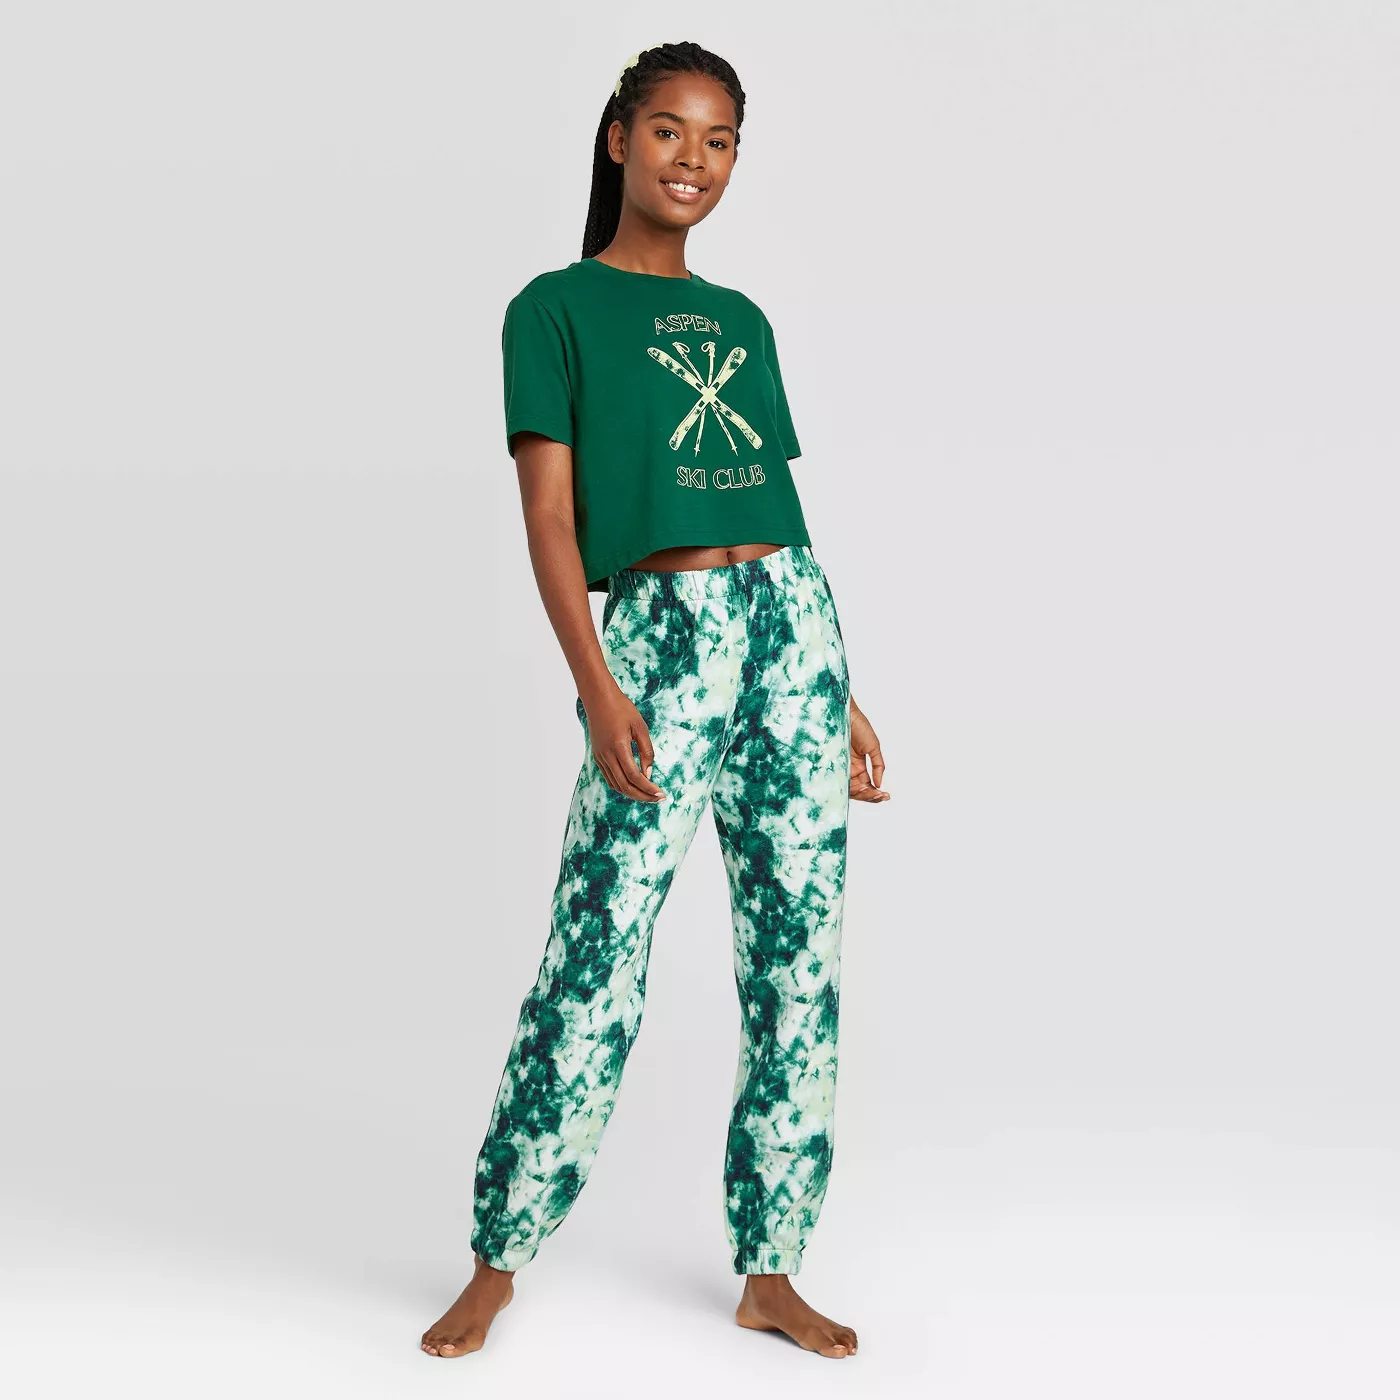 Women's T-Shirt and Fleece Joggers Pajama Set with Scrunchie - Colsie™ - image 1 of 9